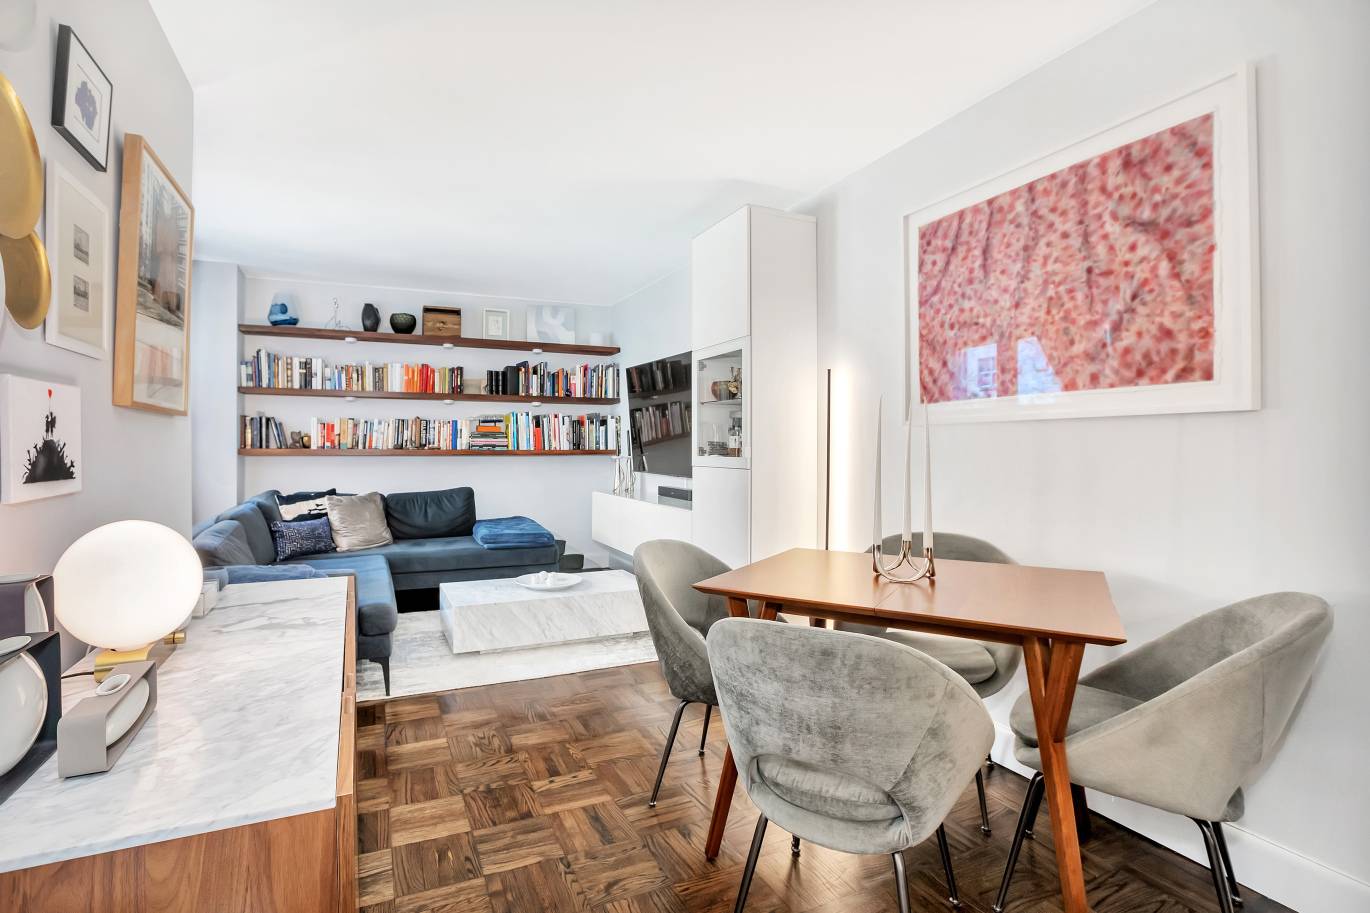 Move right into this flawless, gut renovated one bedroom, one bathroom home situated at the quiet rear of one Gramercy's most popular cooperatives.